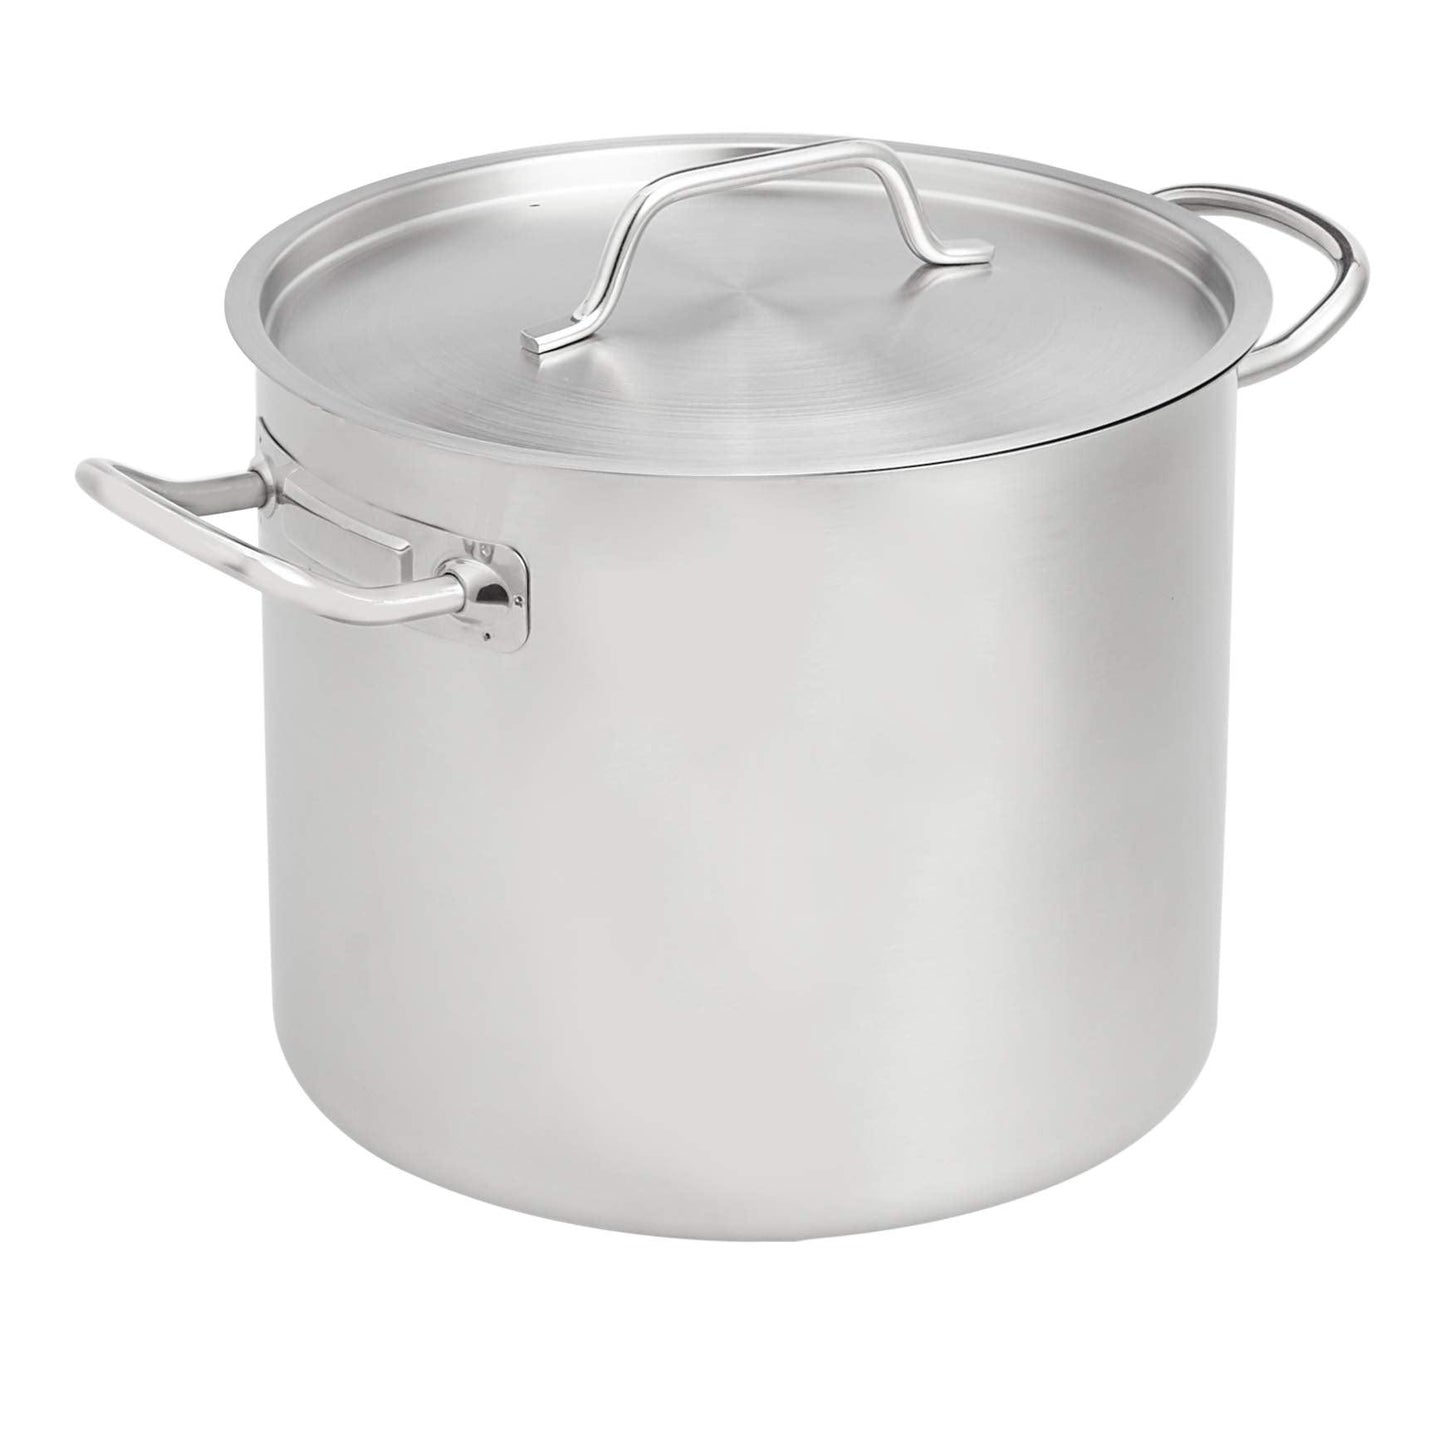 AmazonCommercial 12QT Stainless Steel Aluminum-Clad Stock Pot with Cover - CookCave